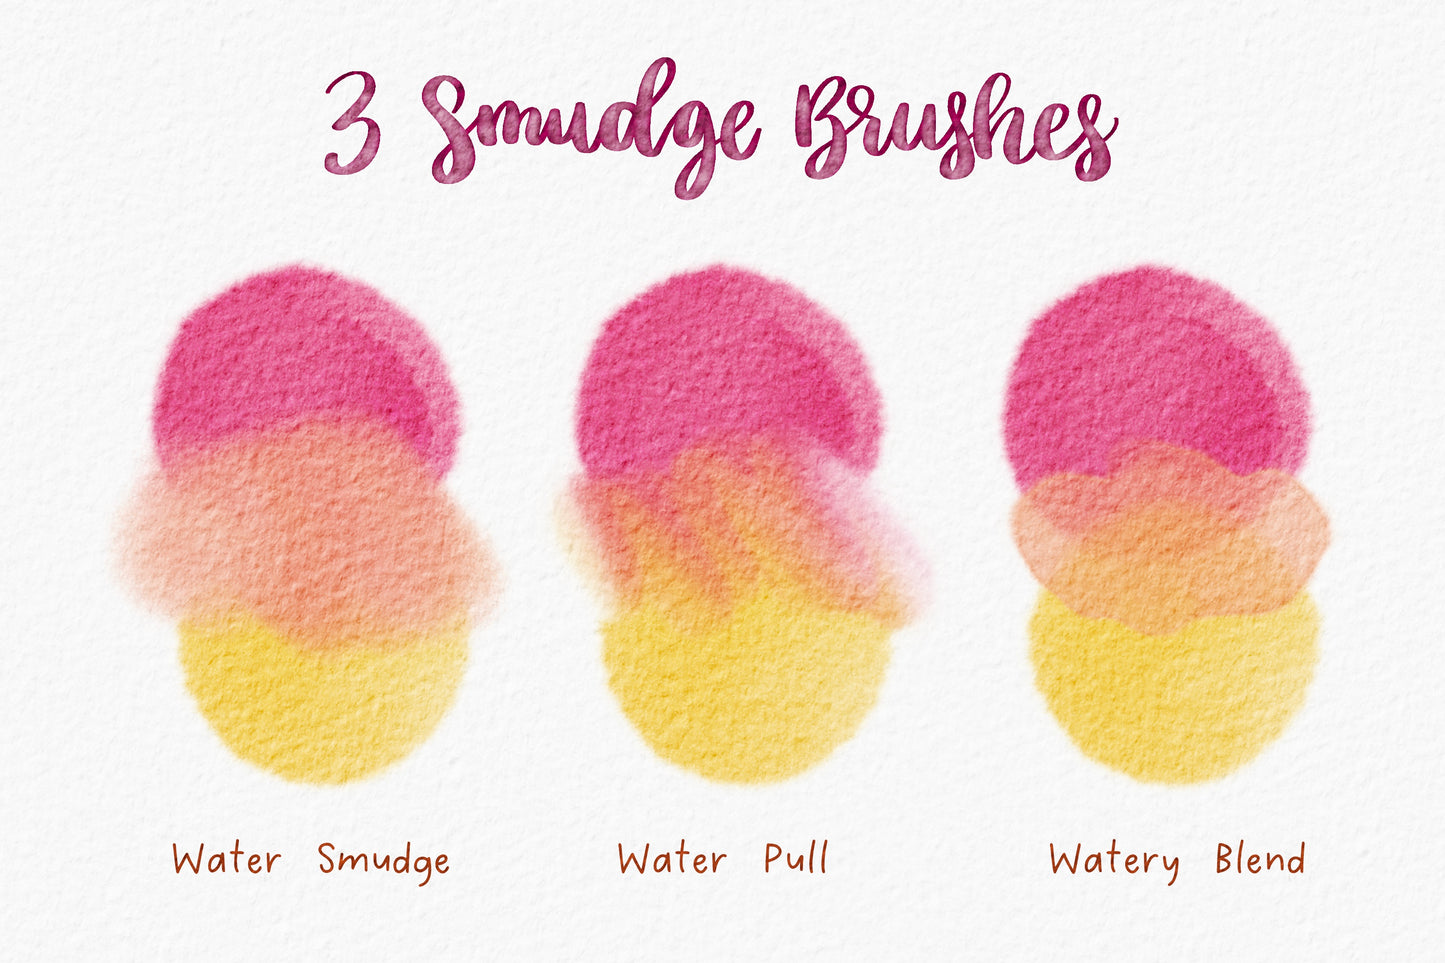 Watercolor and Brush · Creativity in your projects